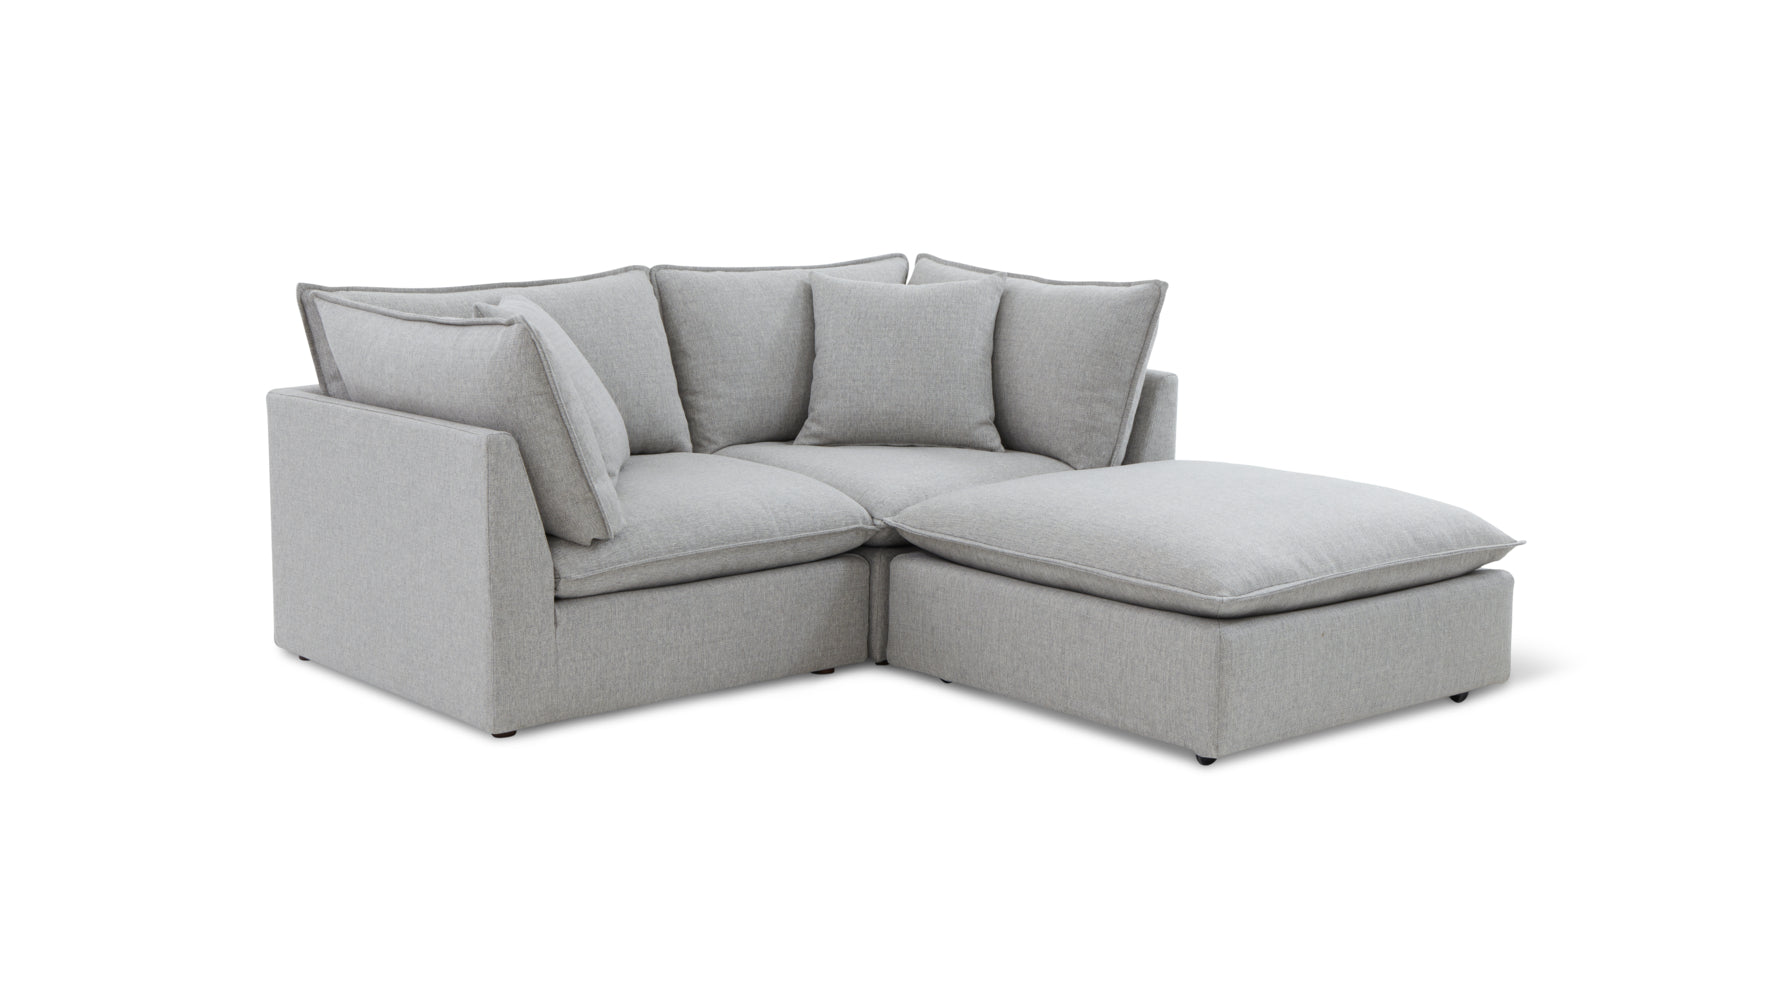 Chill Time 3-Piece Modular Sectional, Heather - Image 2